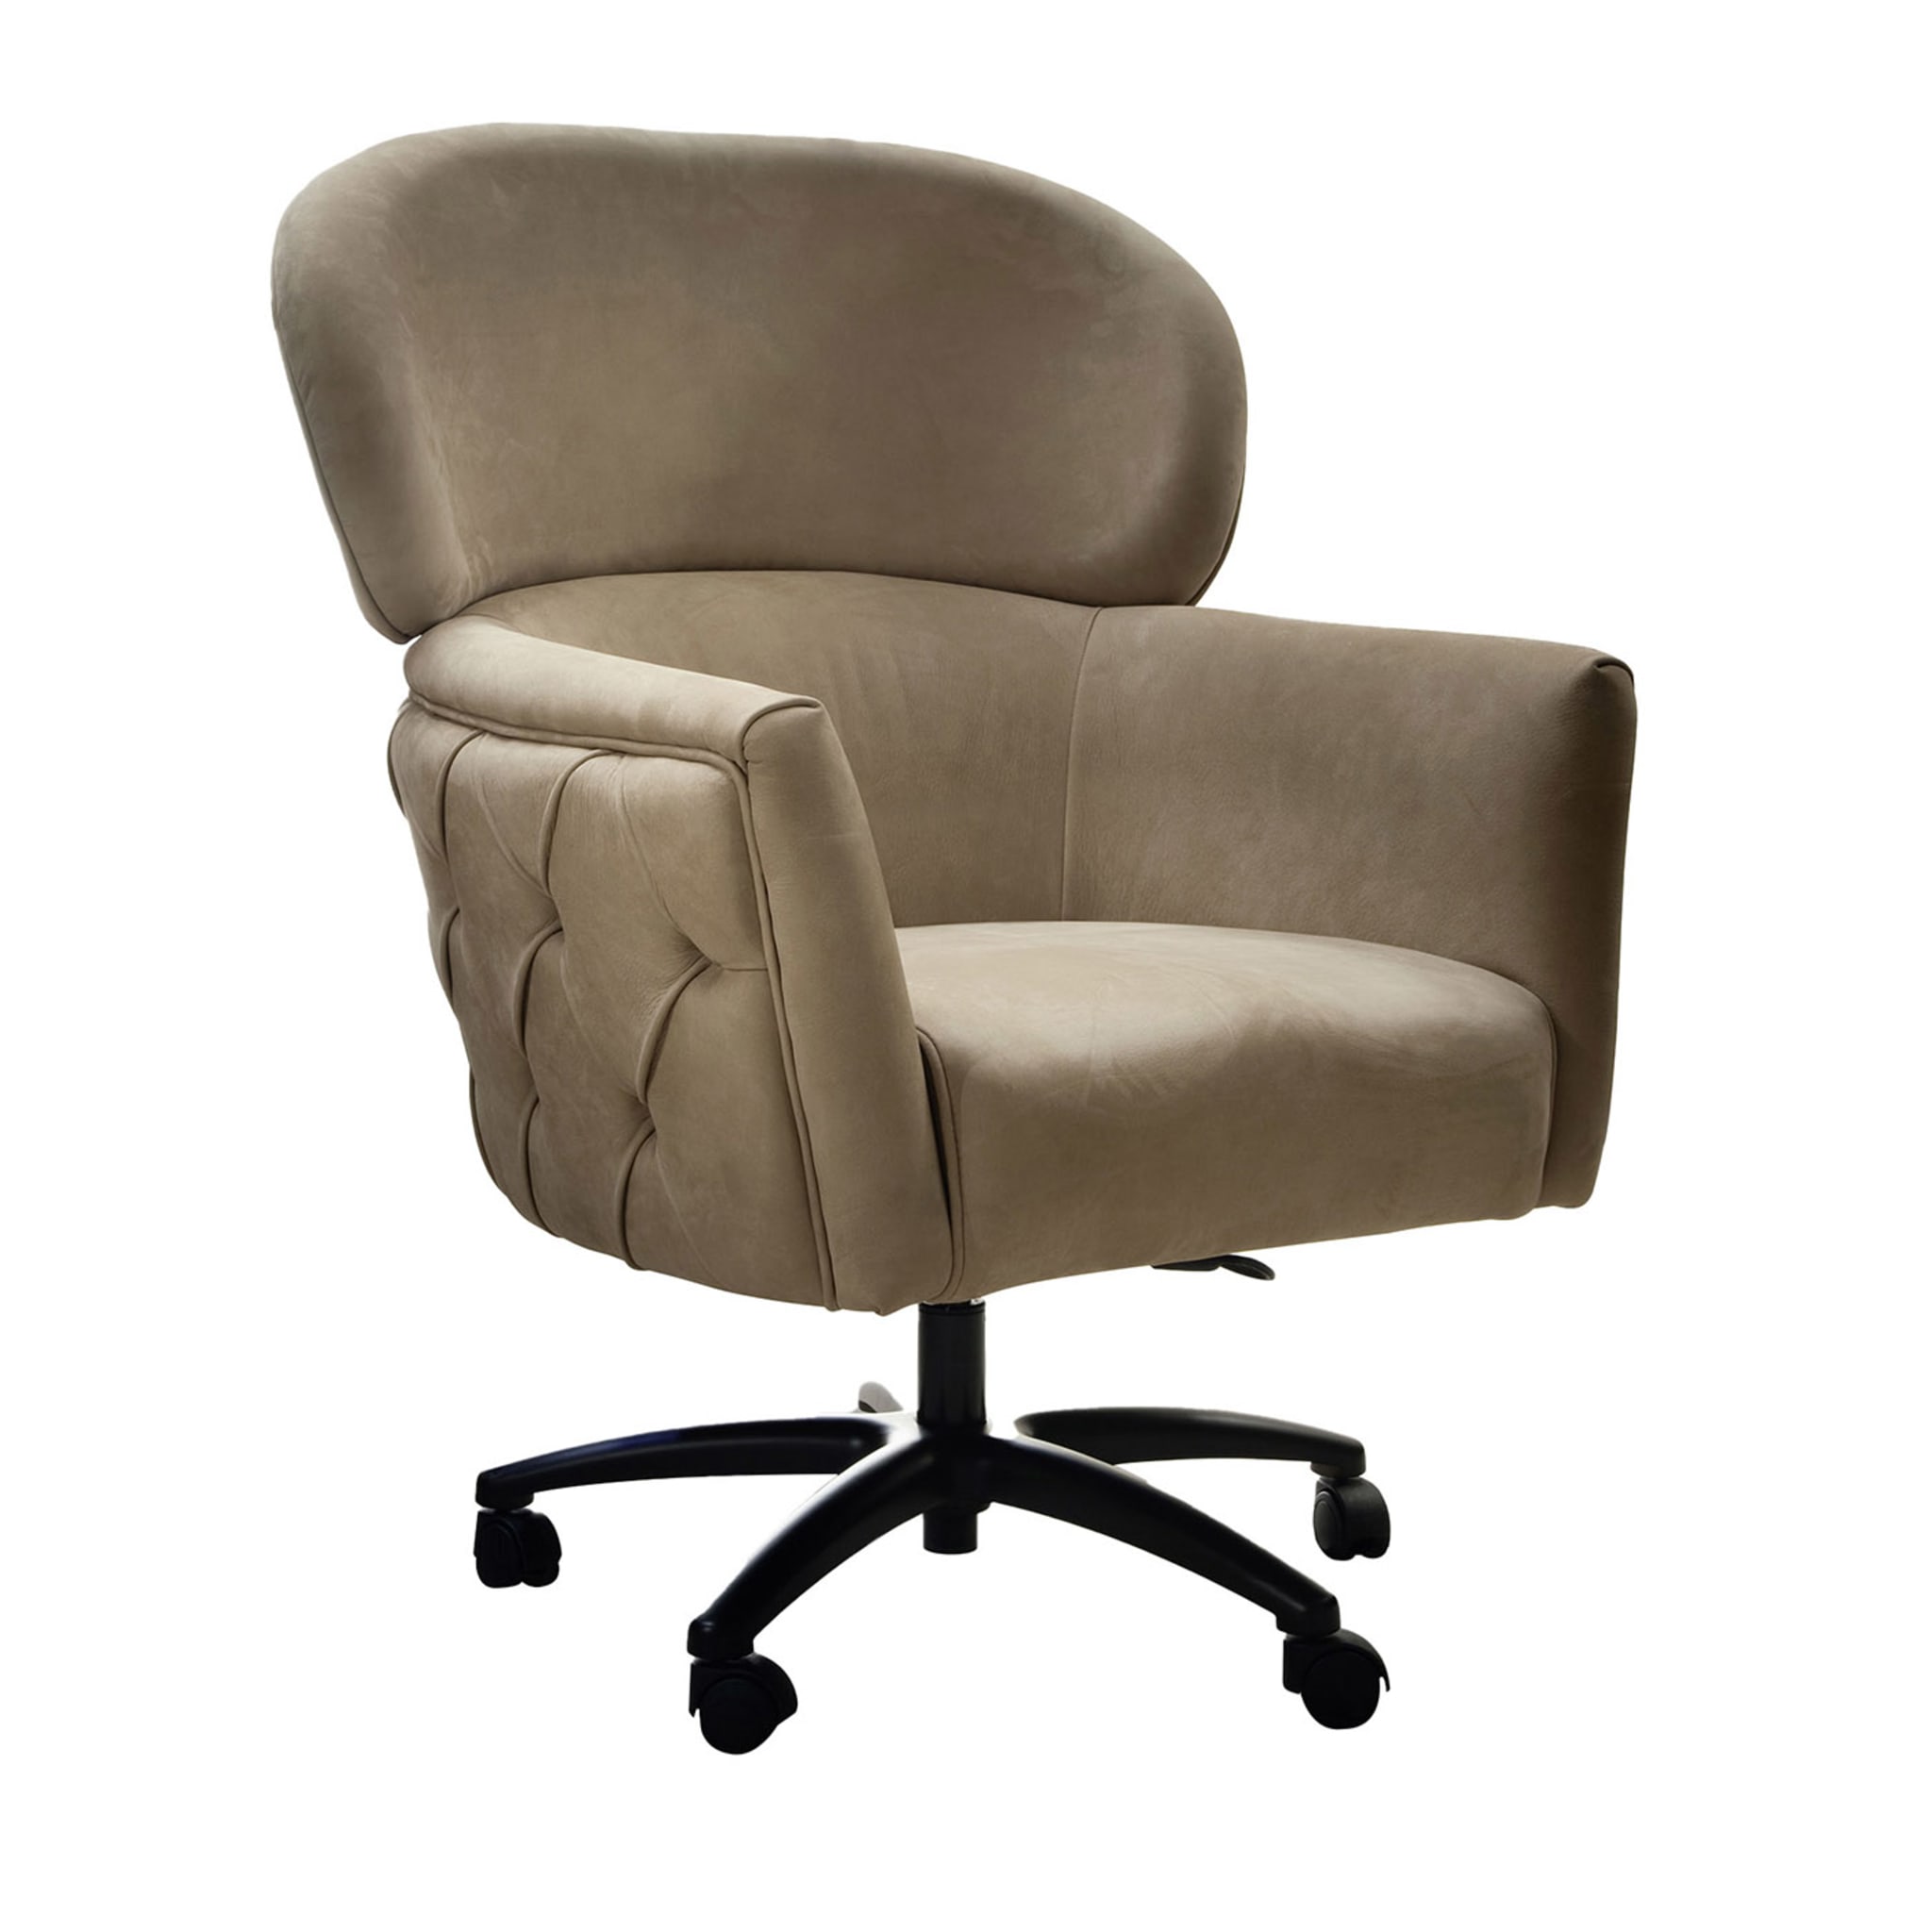 Cappuccino Nabuk Presidential Office Chair - Main view